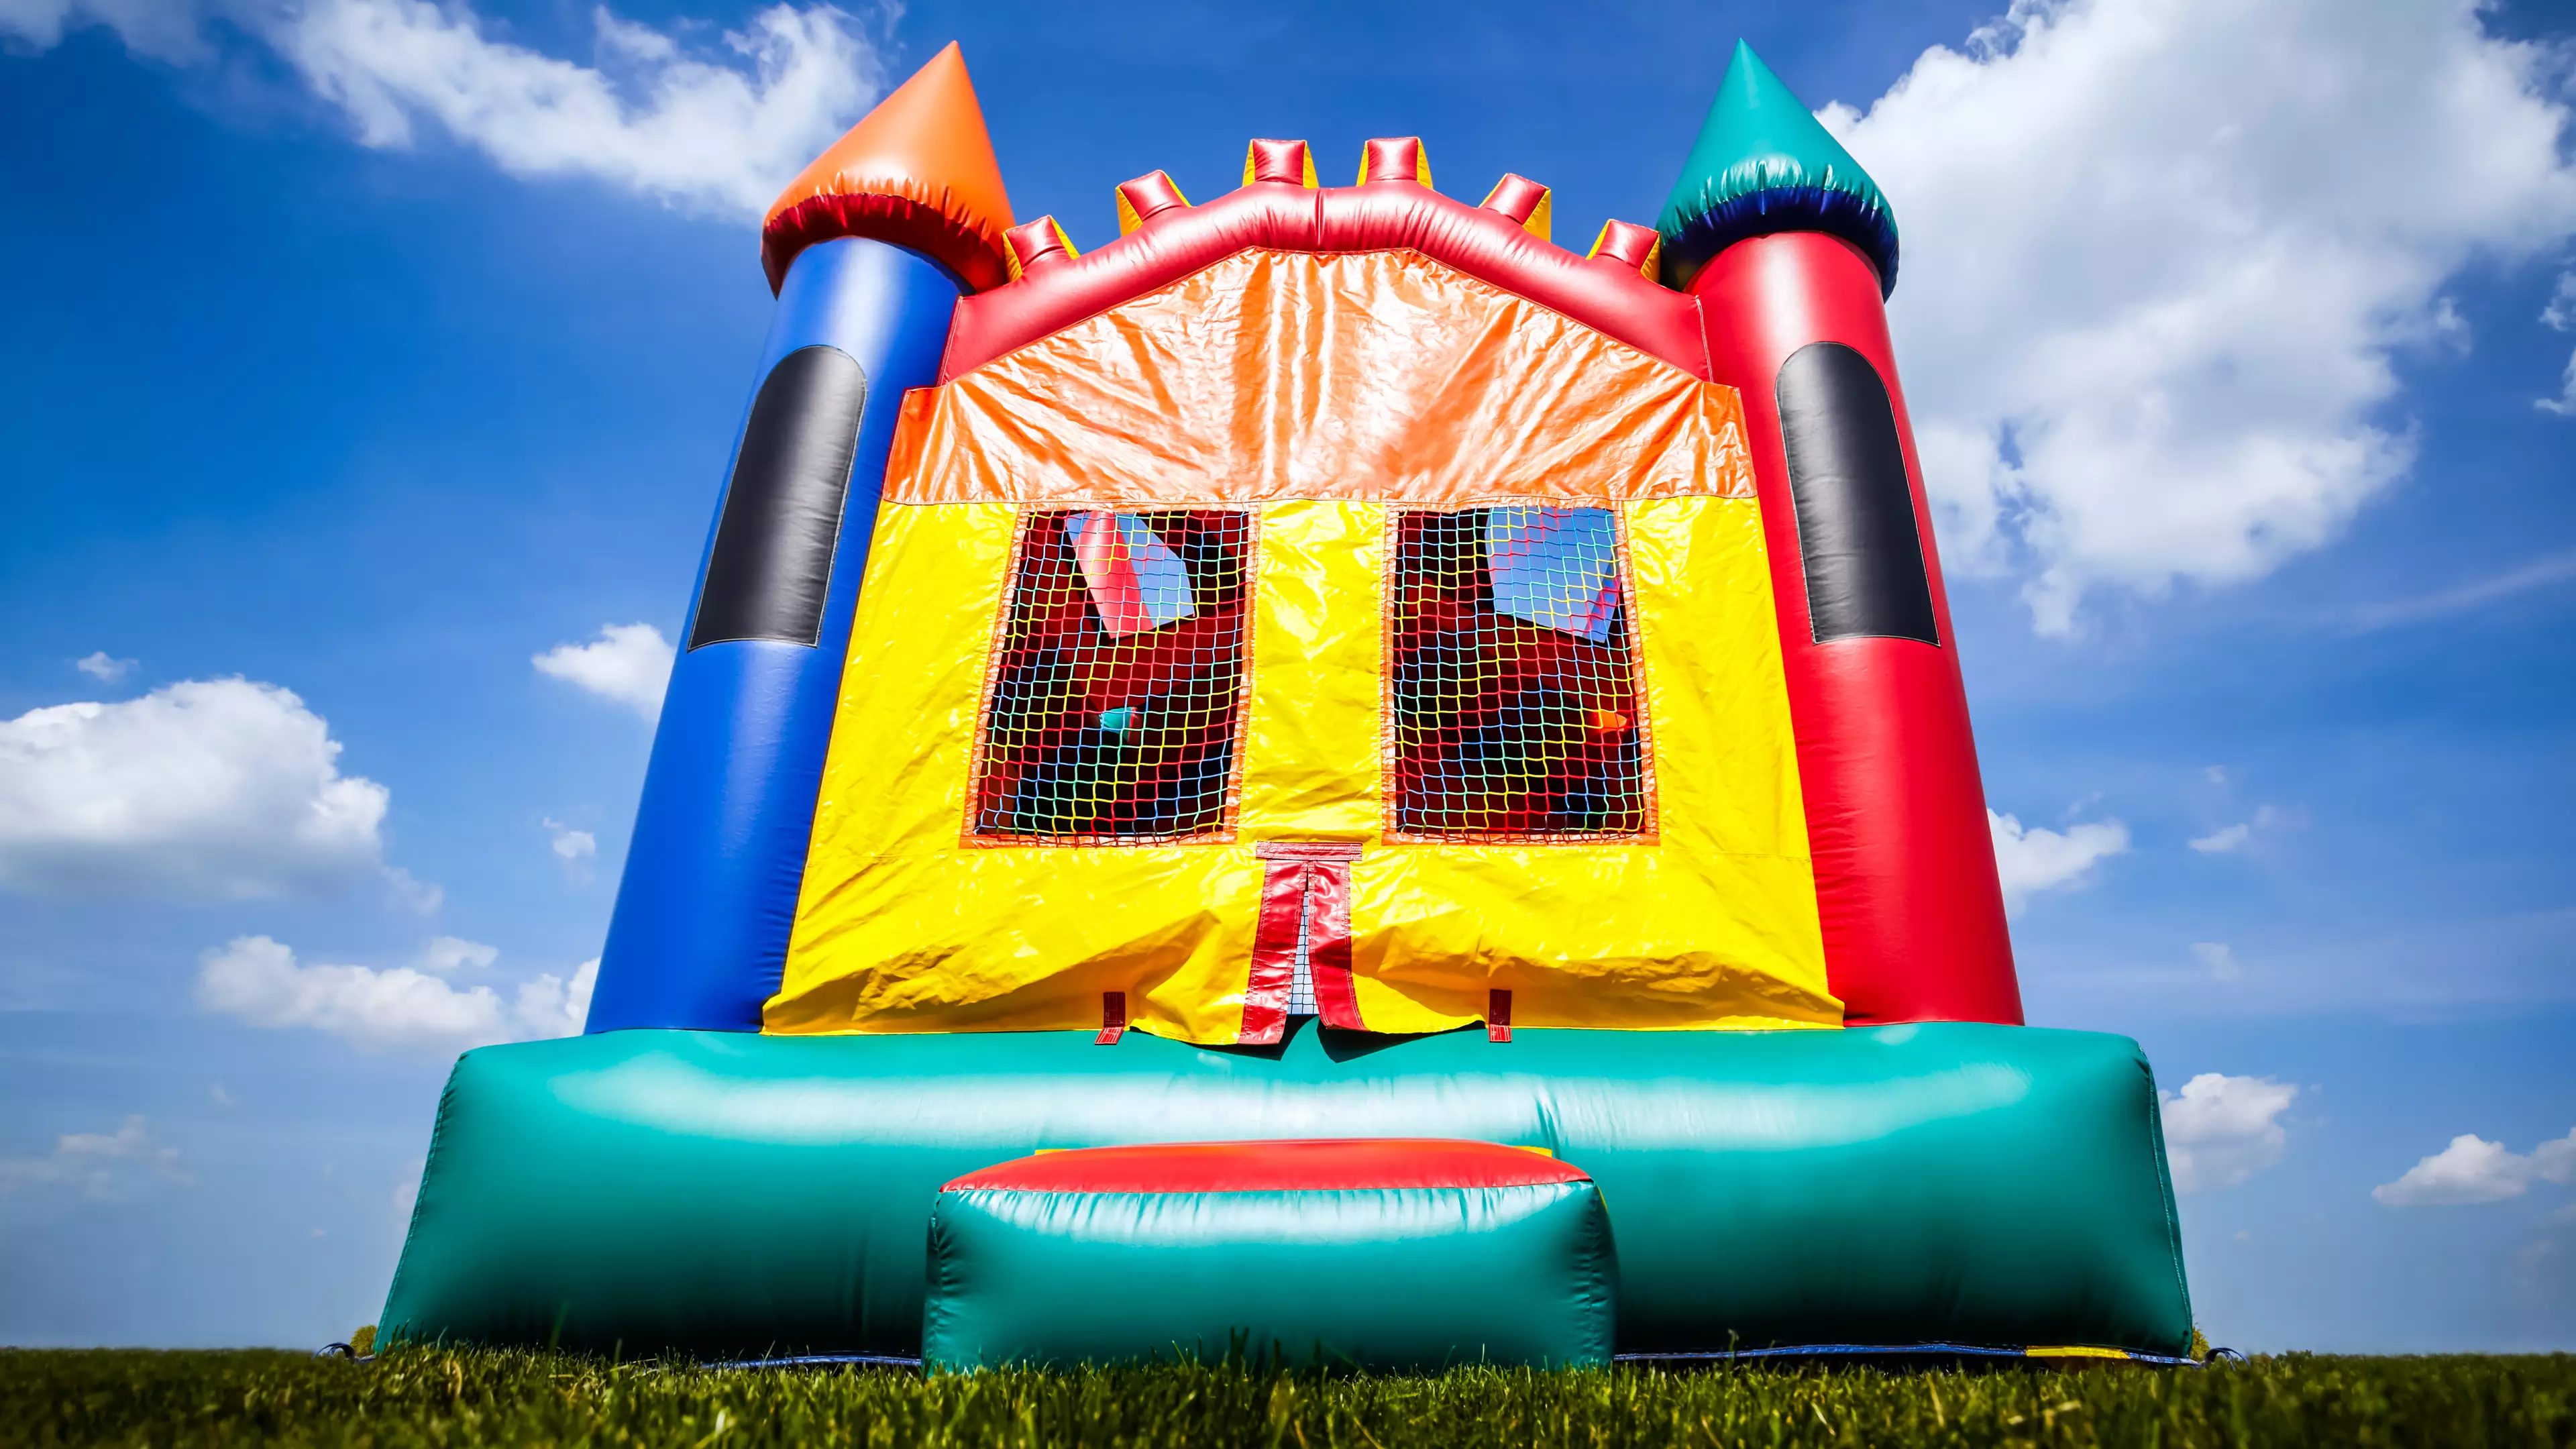 You Can Hire An Adult Bouncy Castle For All The Lockdown Fun